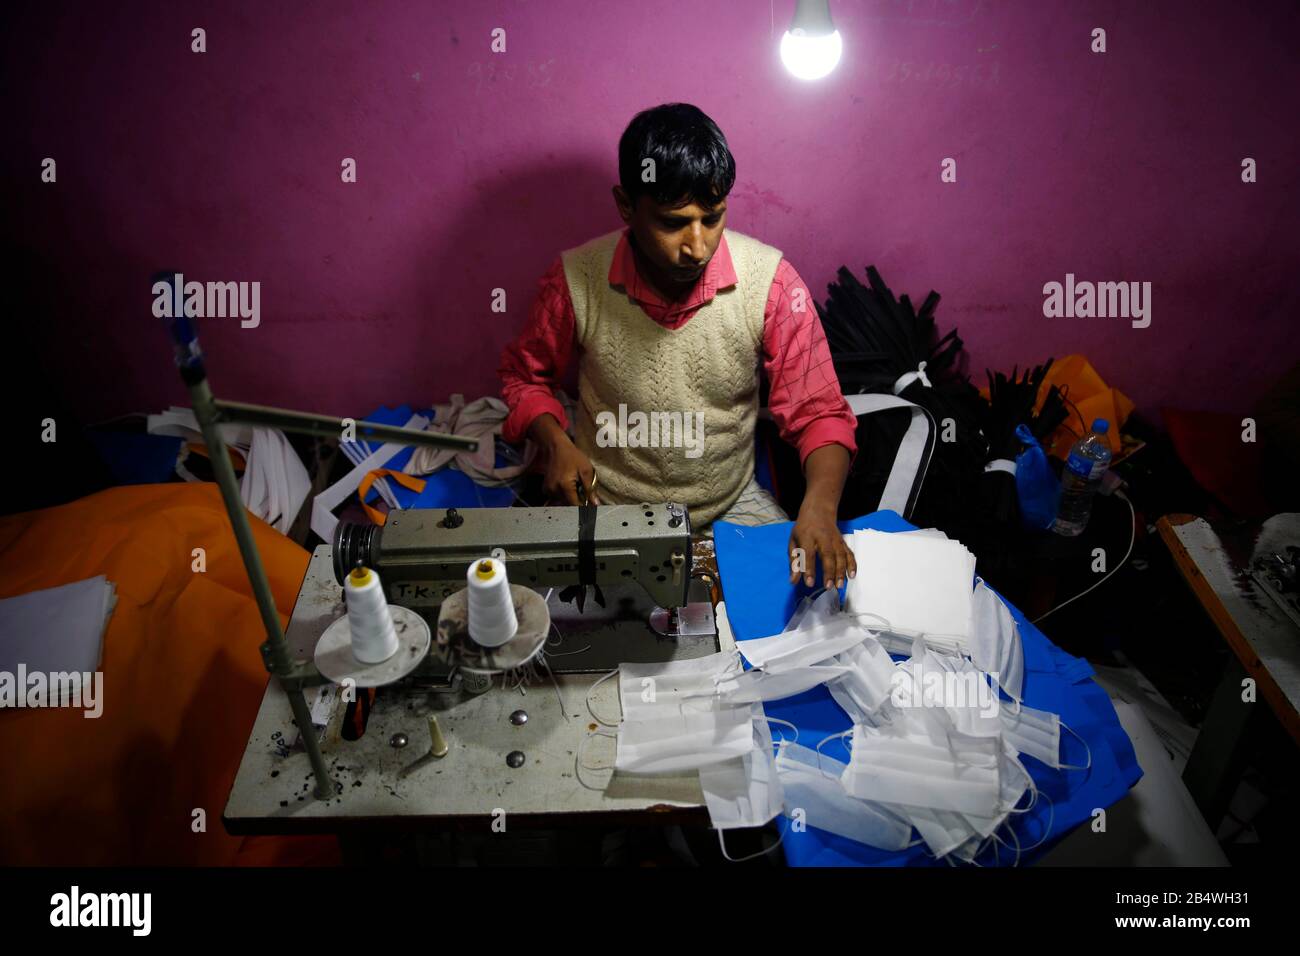 Kathmandu, Nepal. 7th Mar, 2020. A man making fabric face masks due to the shortage in supply caused by coronavirus (COVID-19) outbreak in Kathmandu, Nepal on Saturday, March 07, 2020. According to recent media reports more than 102,581 cases and 3,501 deaths have been reported worldwide. Credit: Skanda Gautam/ZUMA Wire/Alamy Live News Stock Photo